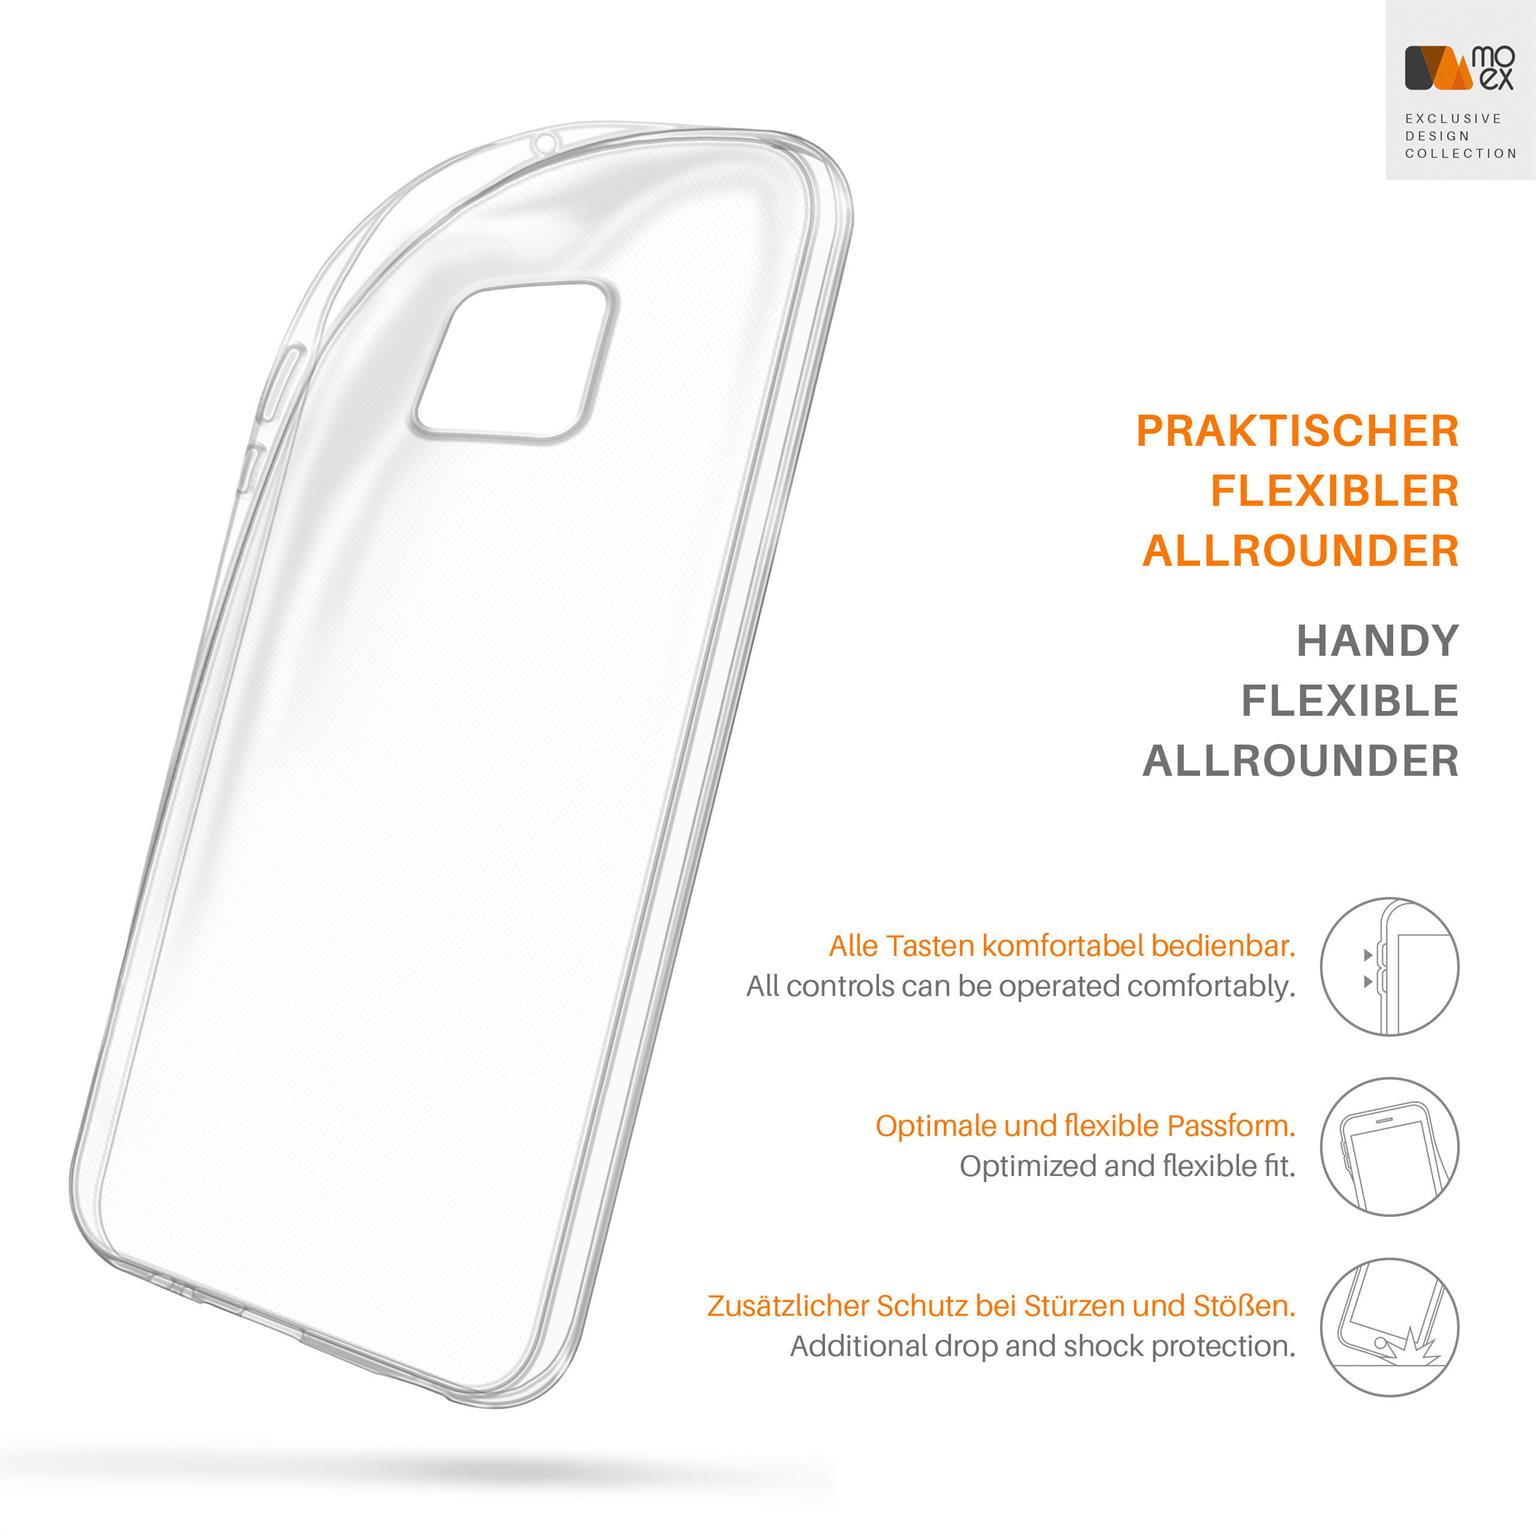 Backcover, Huawei, MOEX 20 Case, Mate Pro, Crystal-Clear Aero